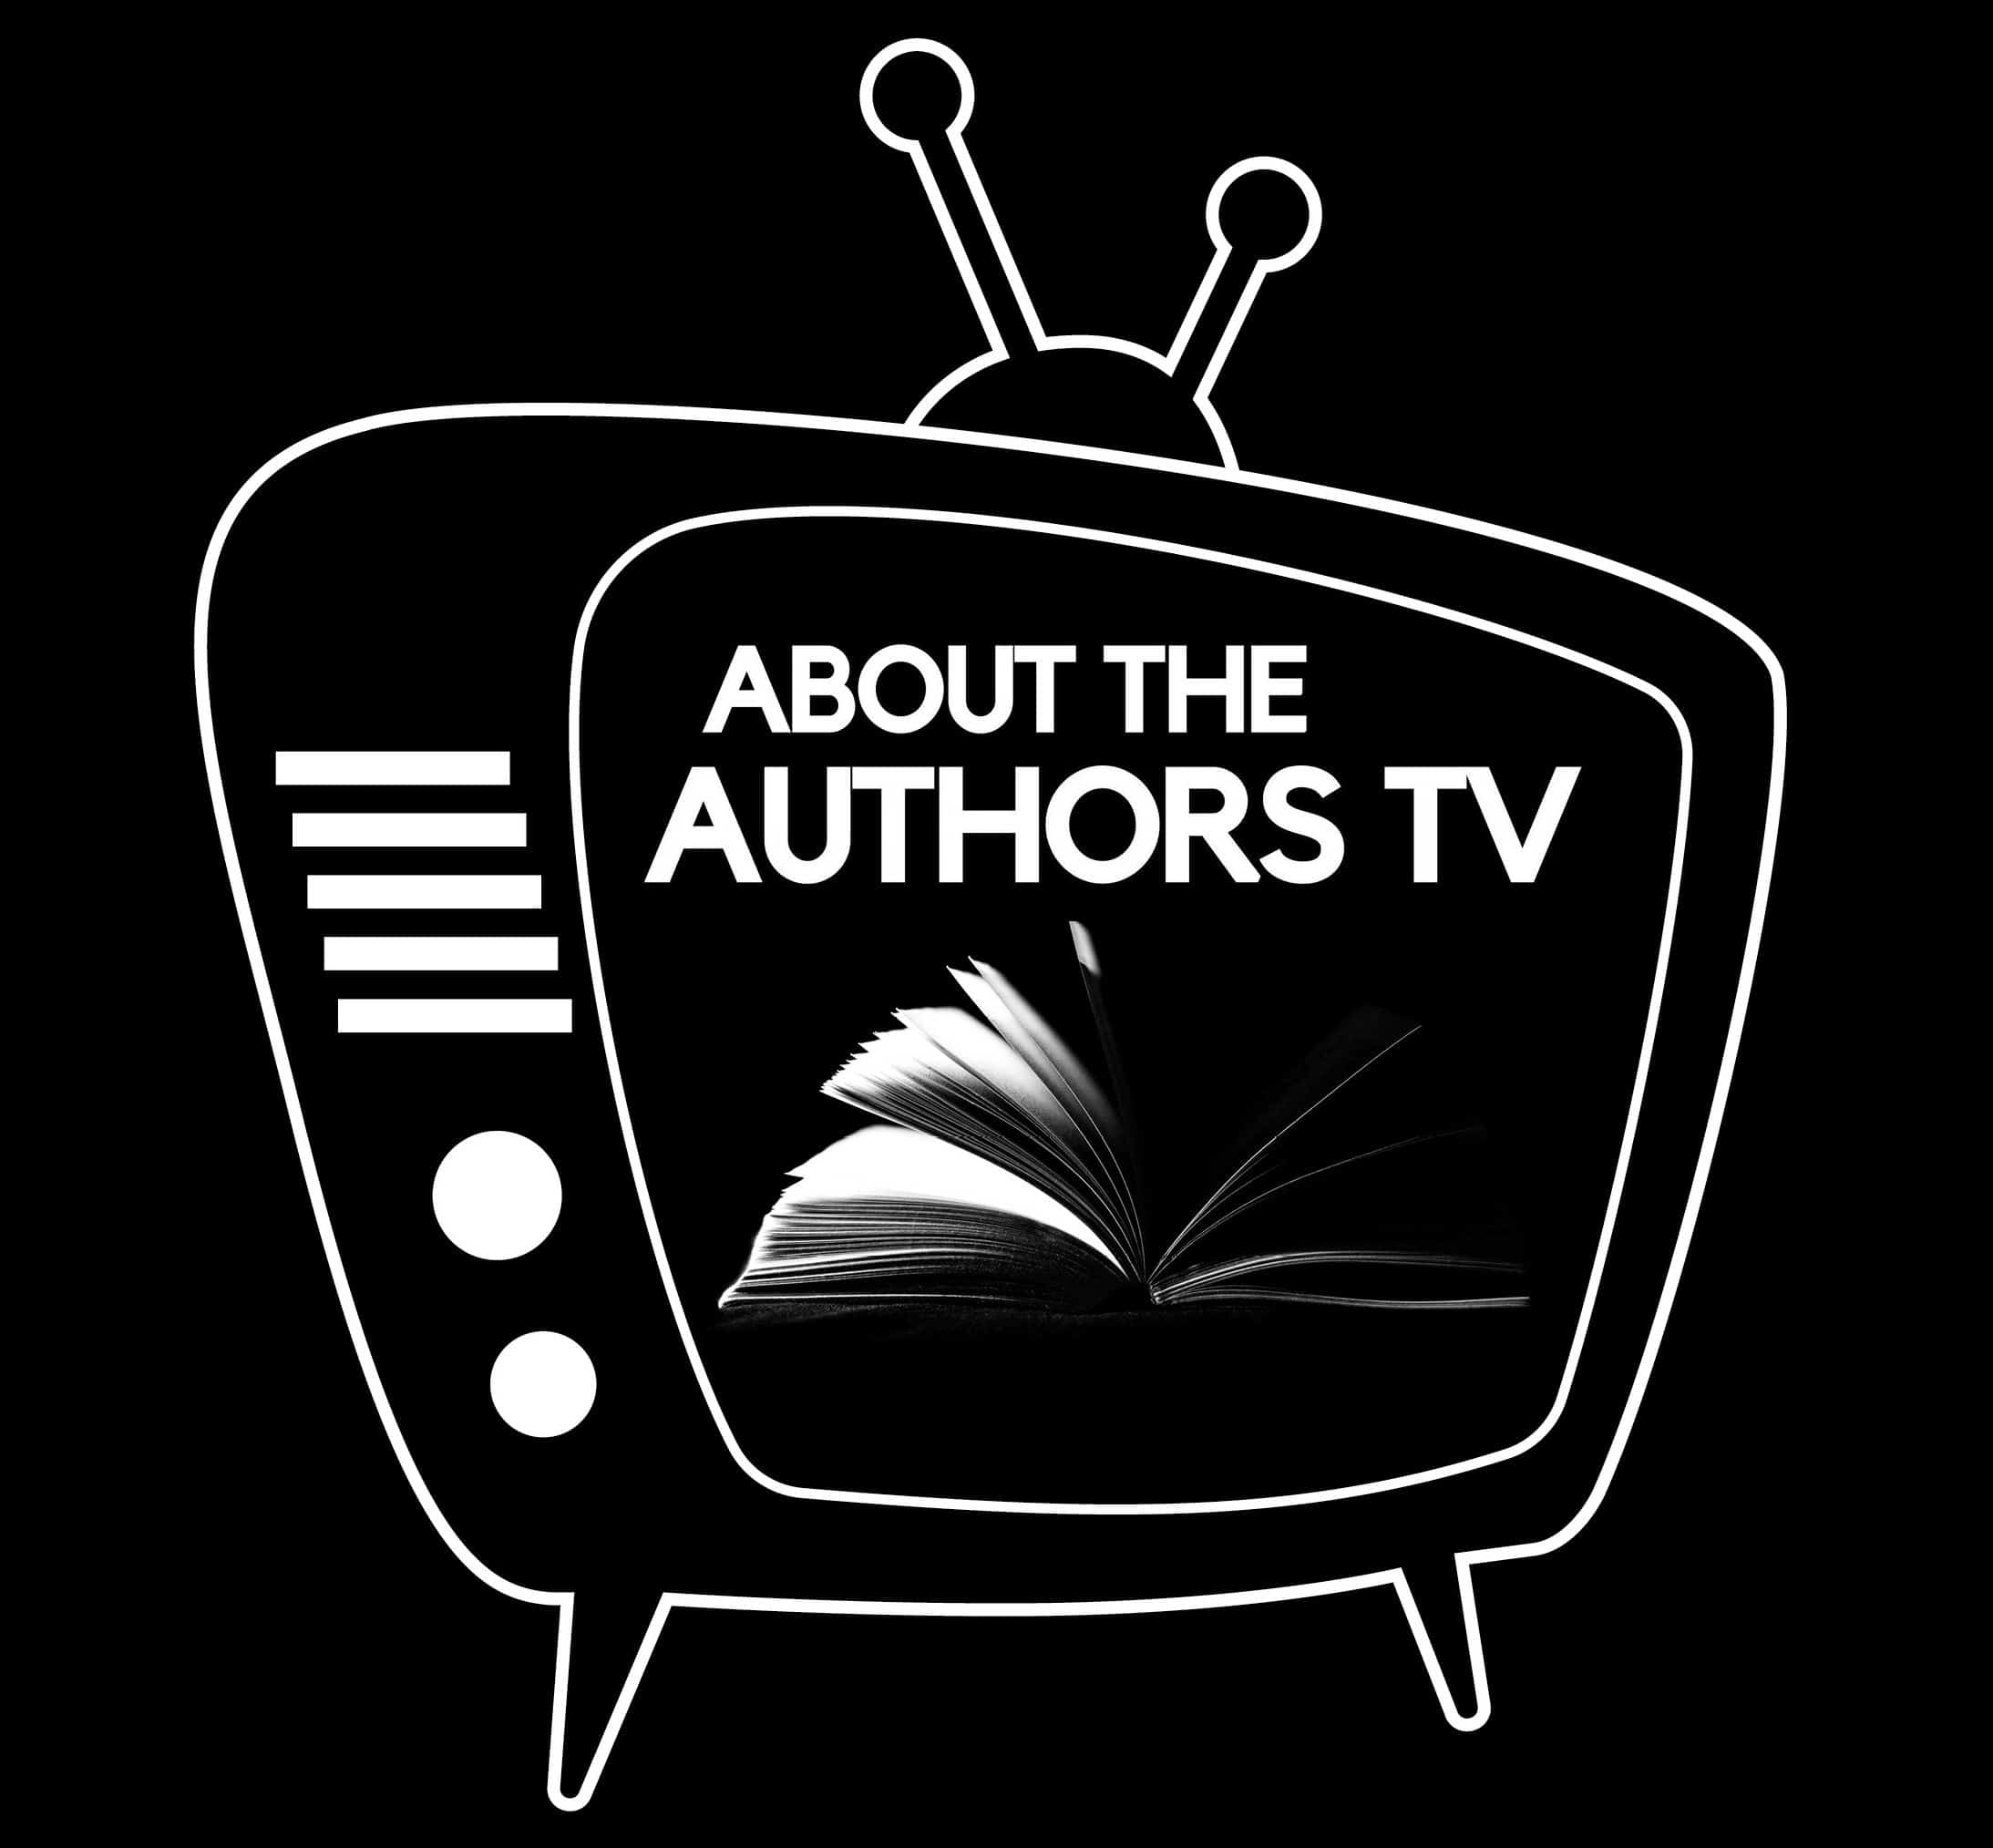 ABOUT THE AUTHORS TV: Discover the Stories Behind the World's Most Popular Storytellers 18